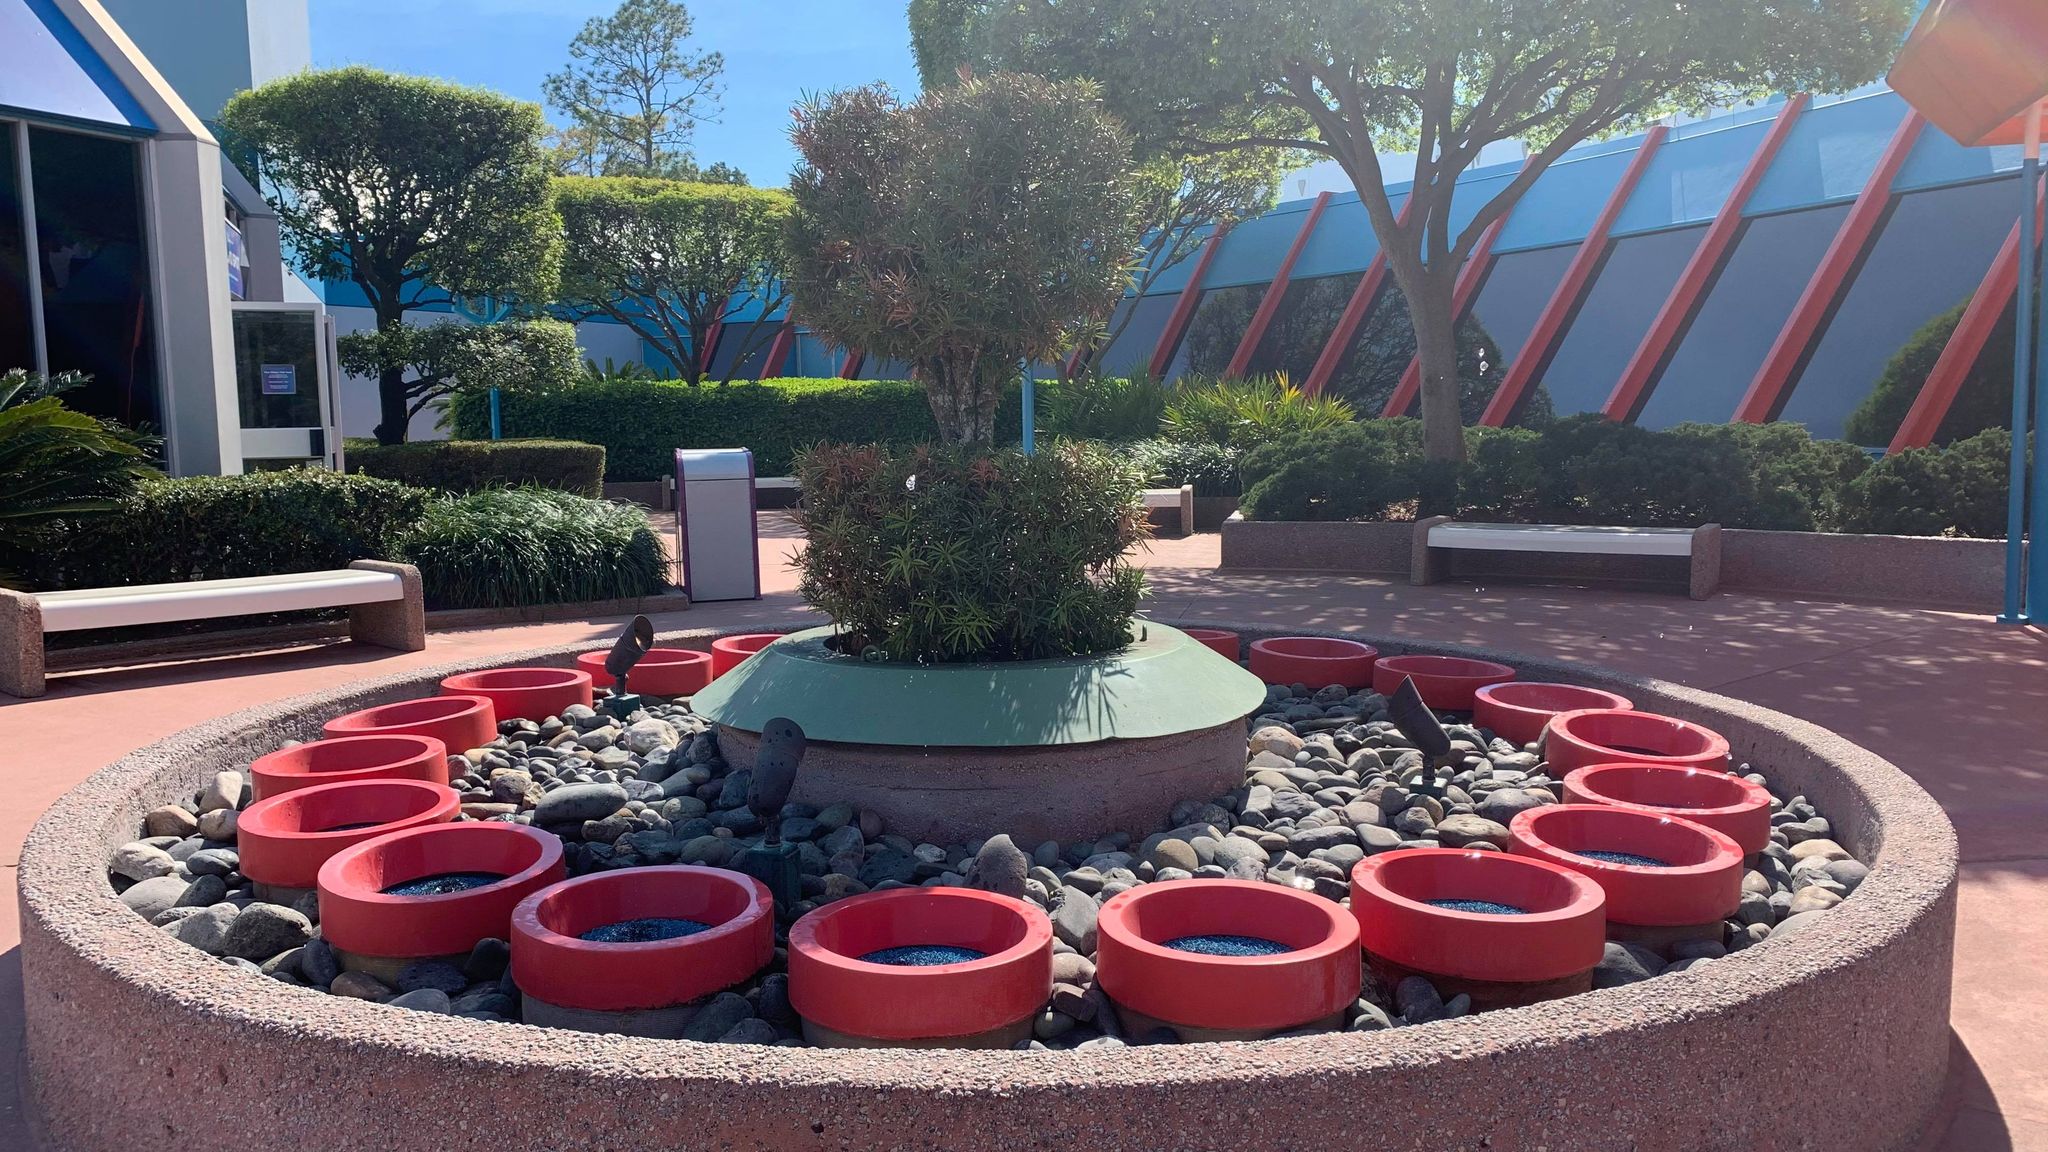 Epcot's Imagination Pavilion Jumping Fountains Are Working Again